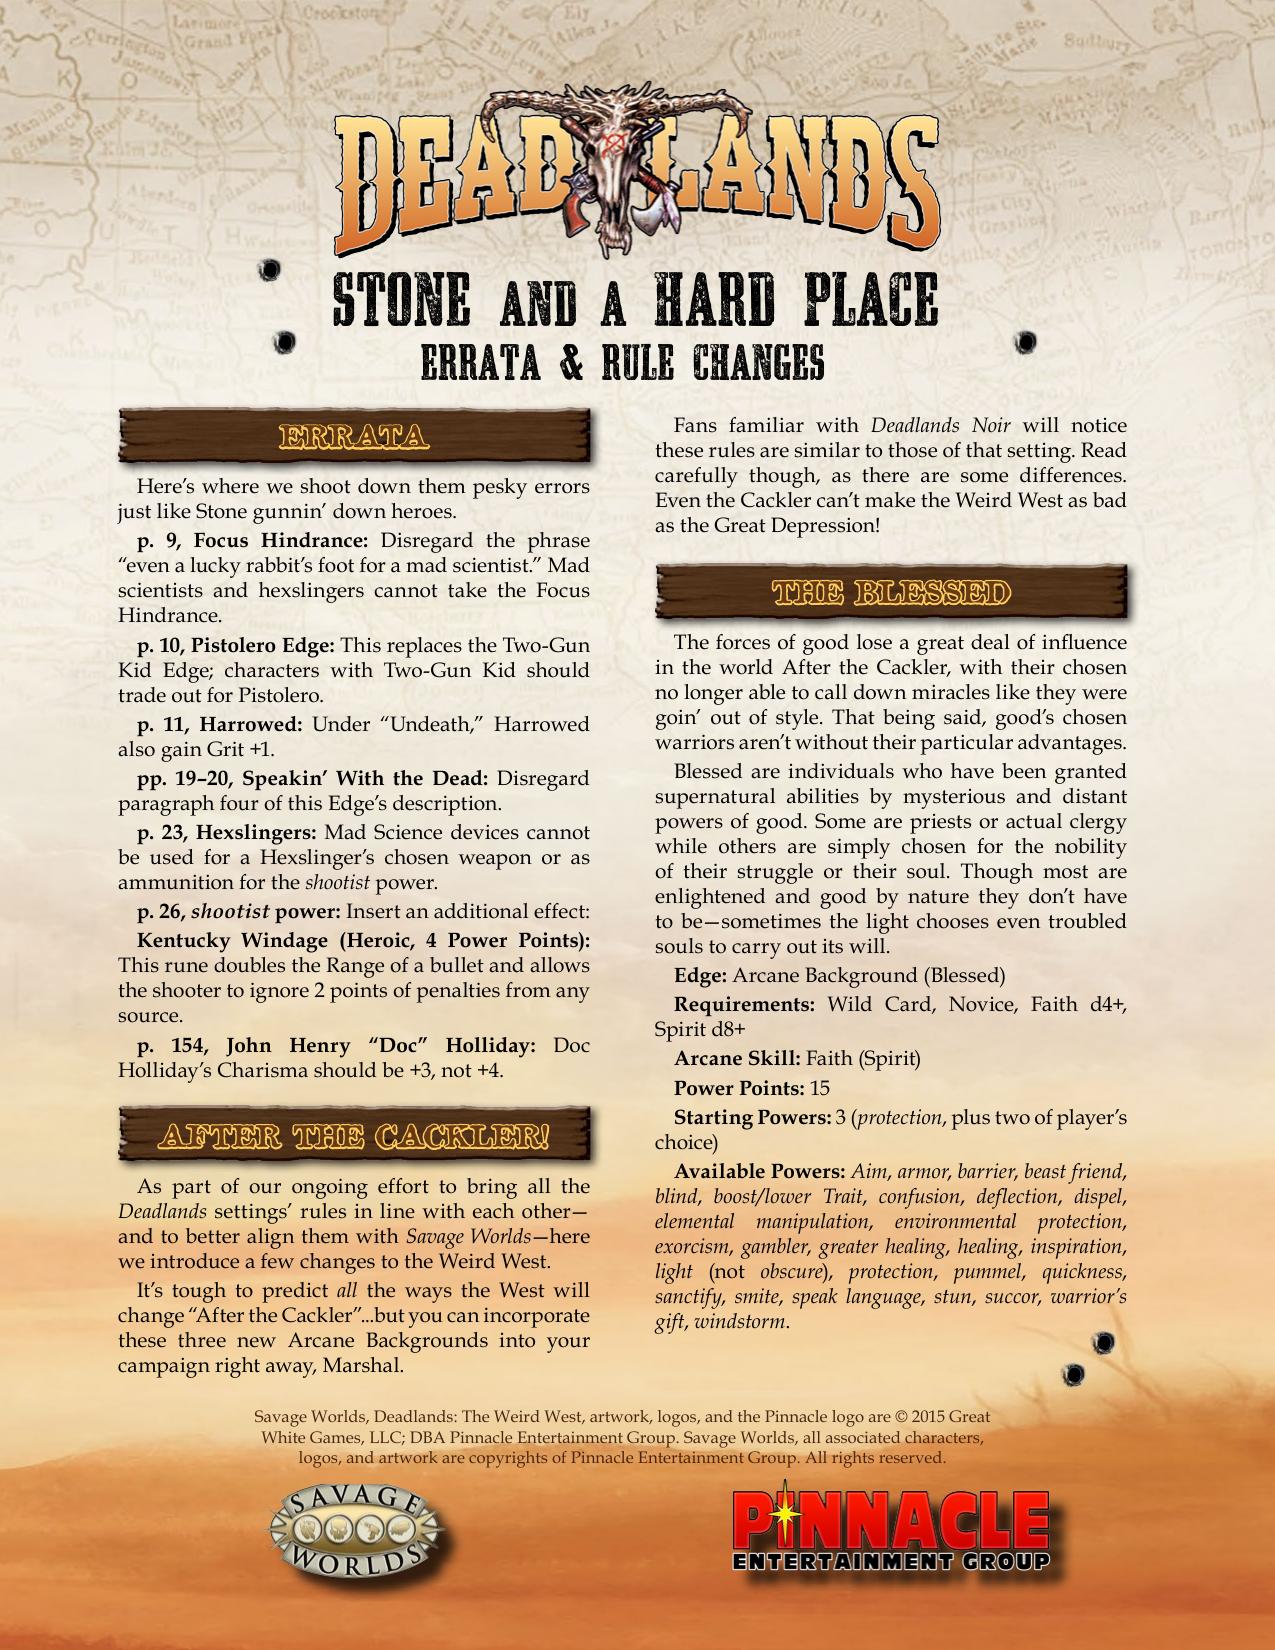 Deadlands Reloaded - 1881 - Stone and a Hard Place